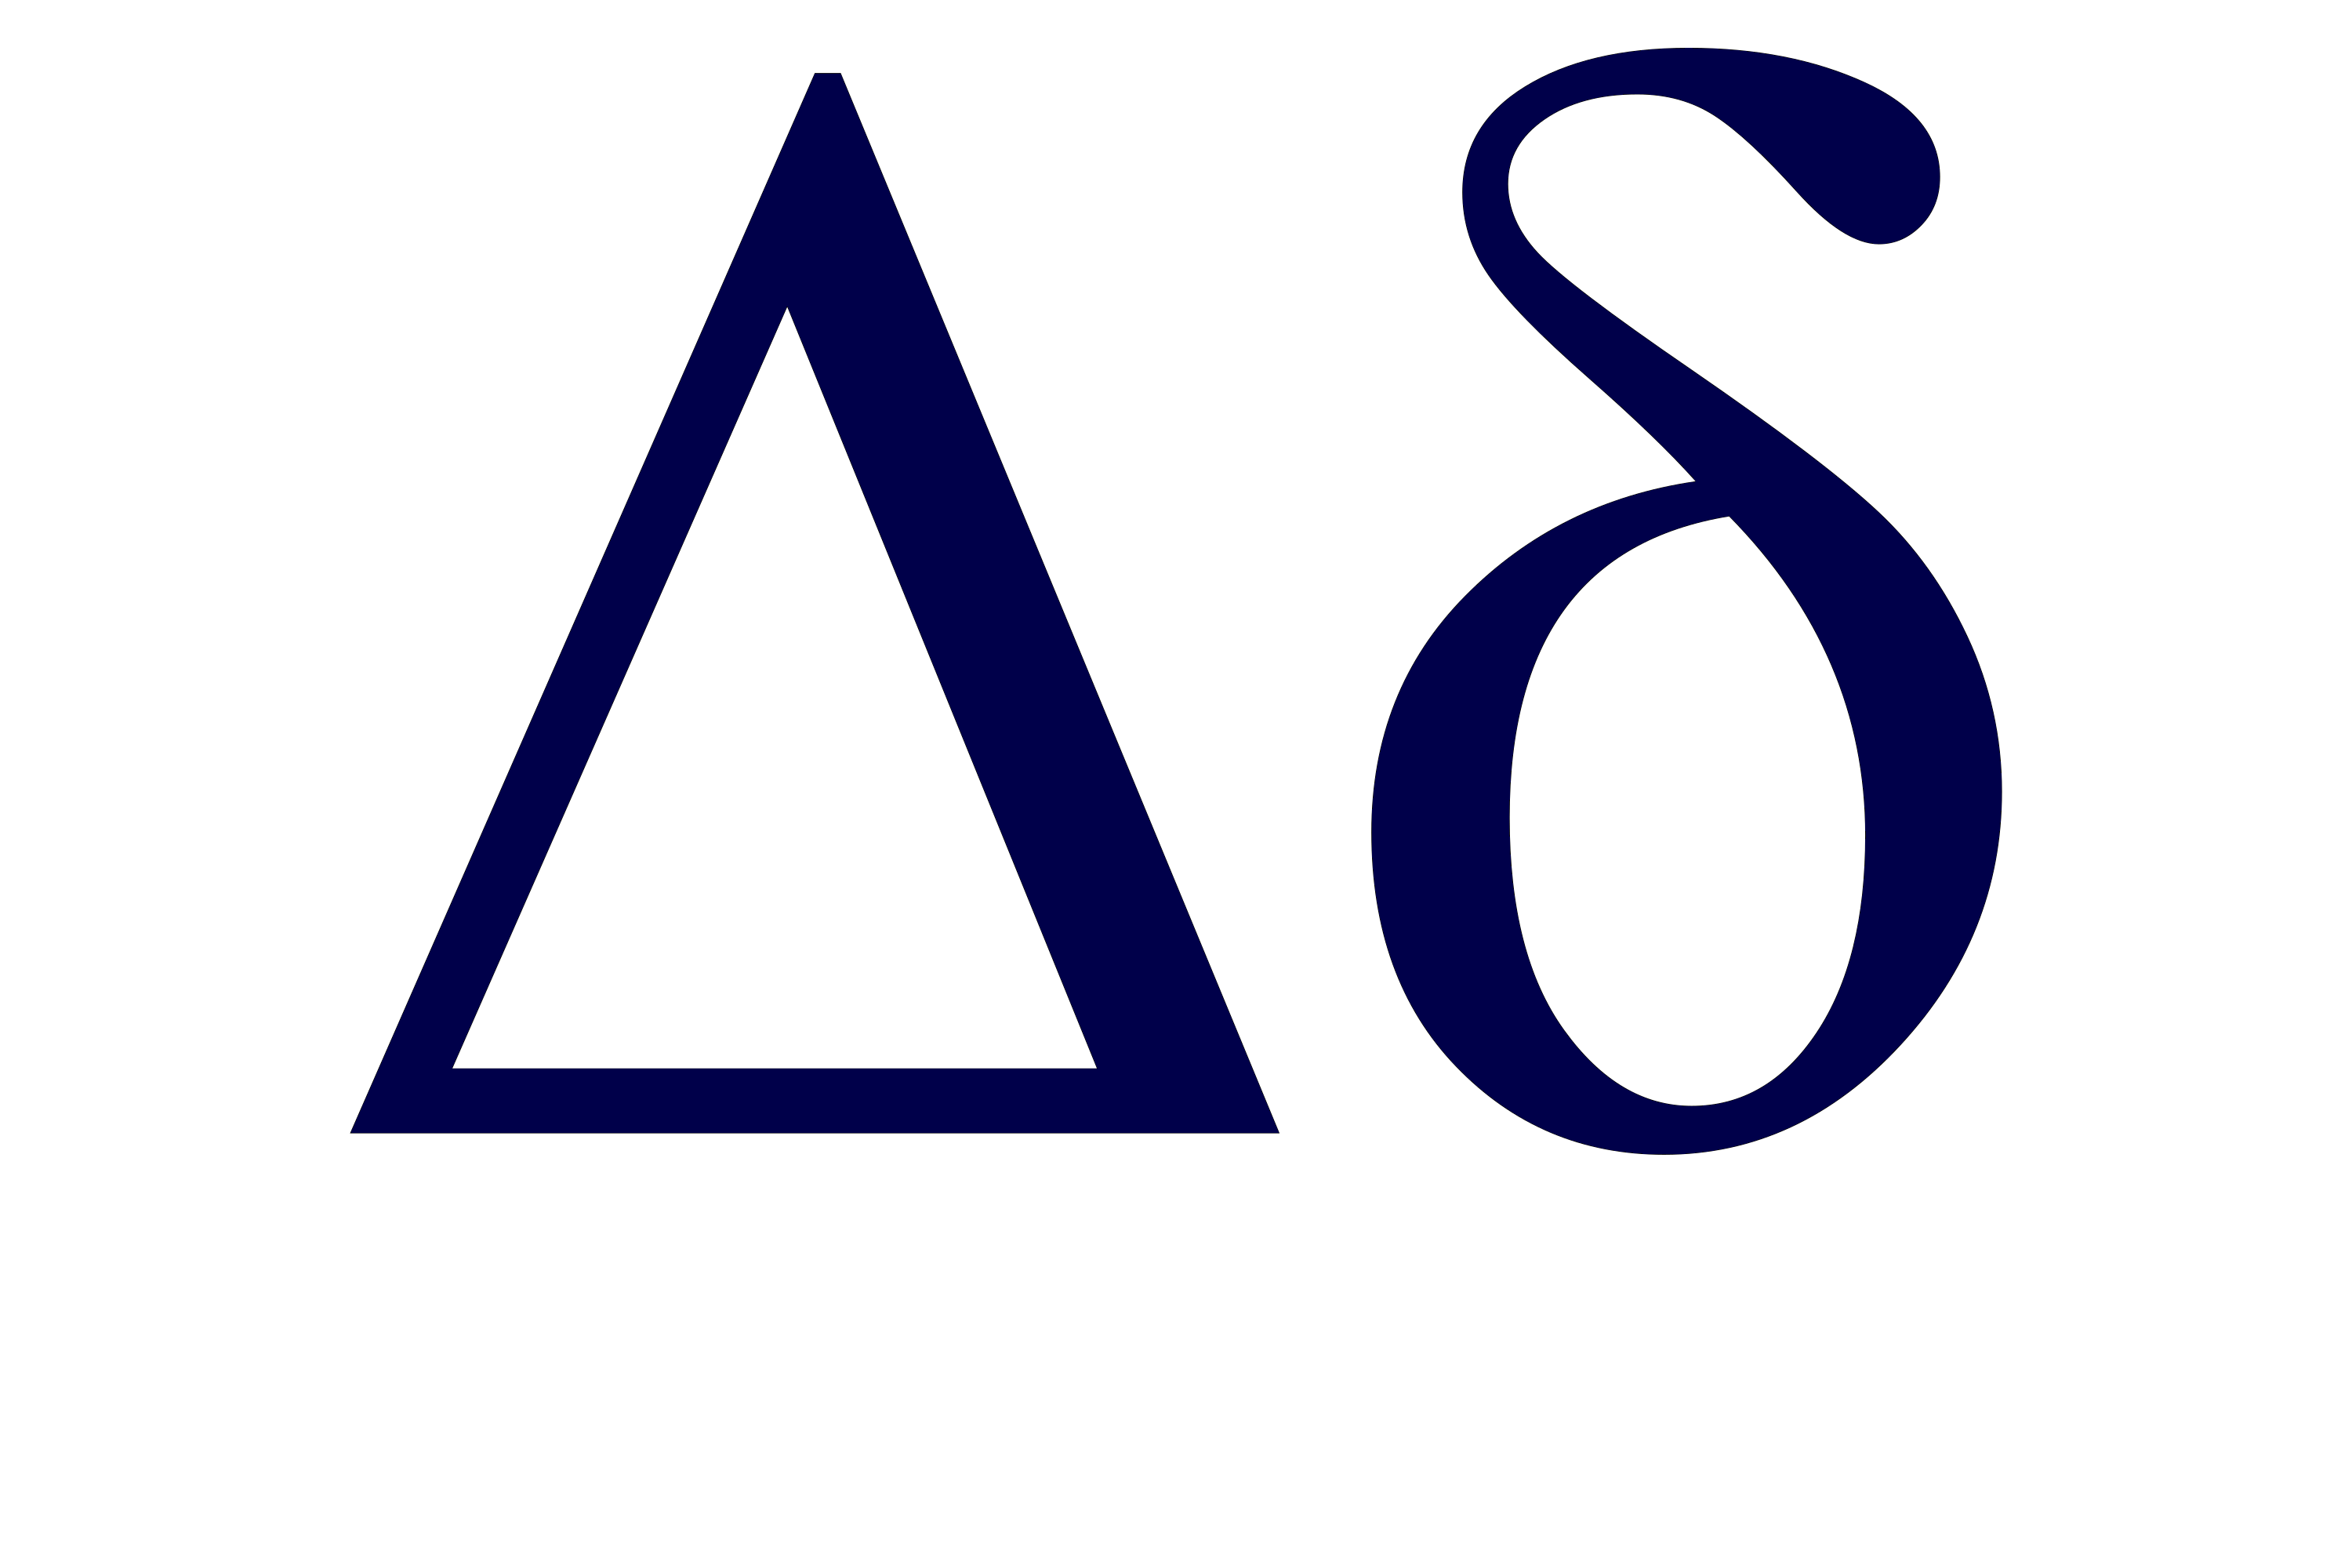 delta-symbol-sign-and-it-s-meaning-in-maths-how-to-insert-in-excel-word